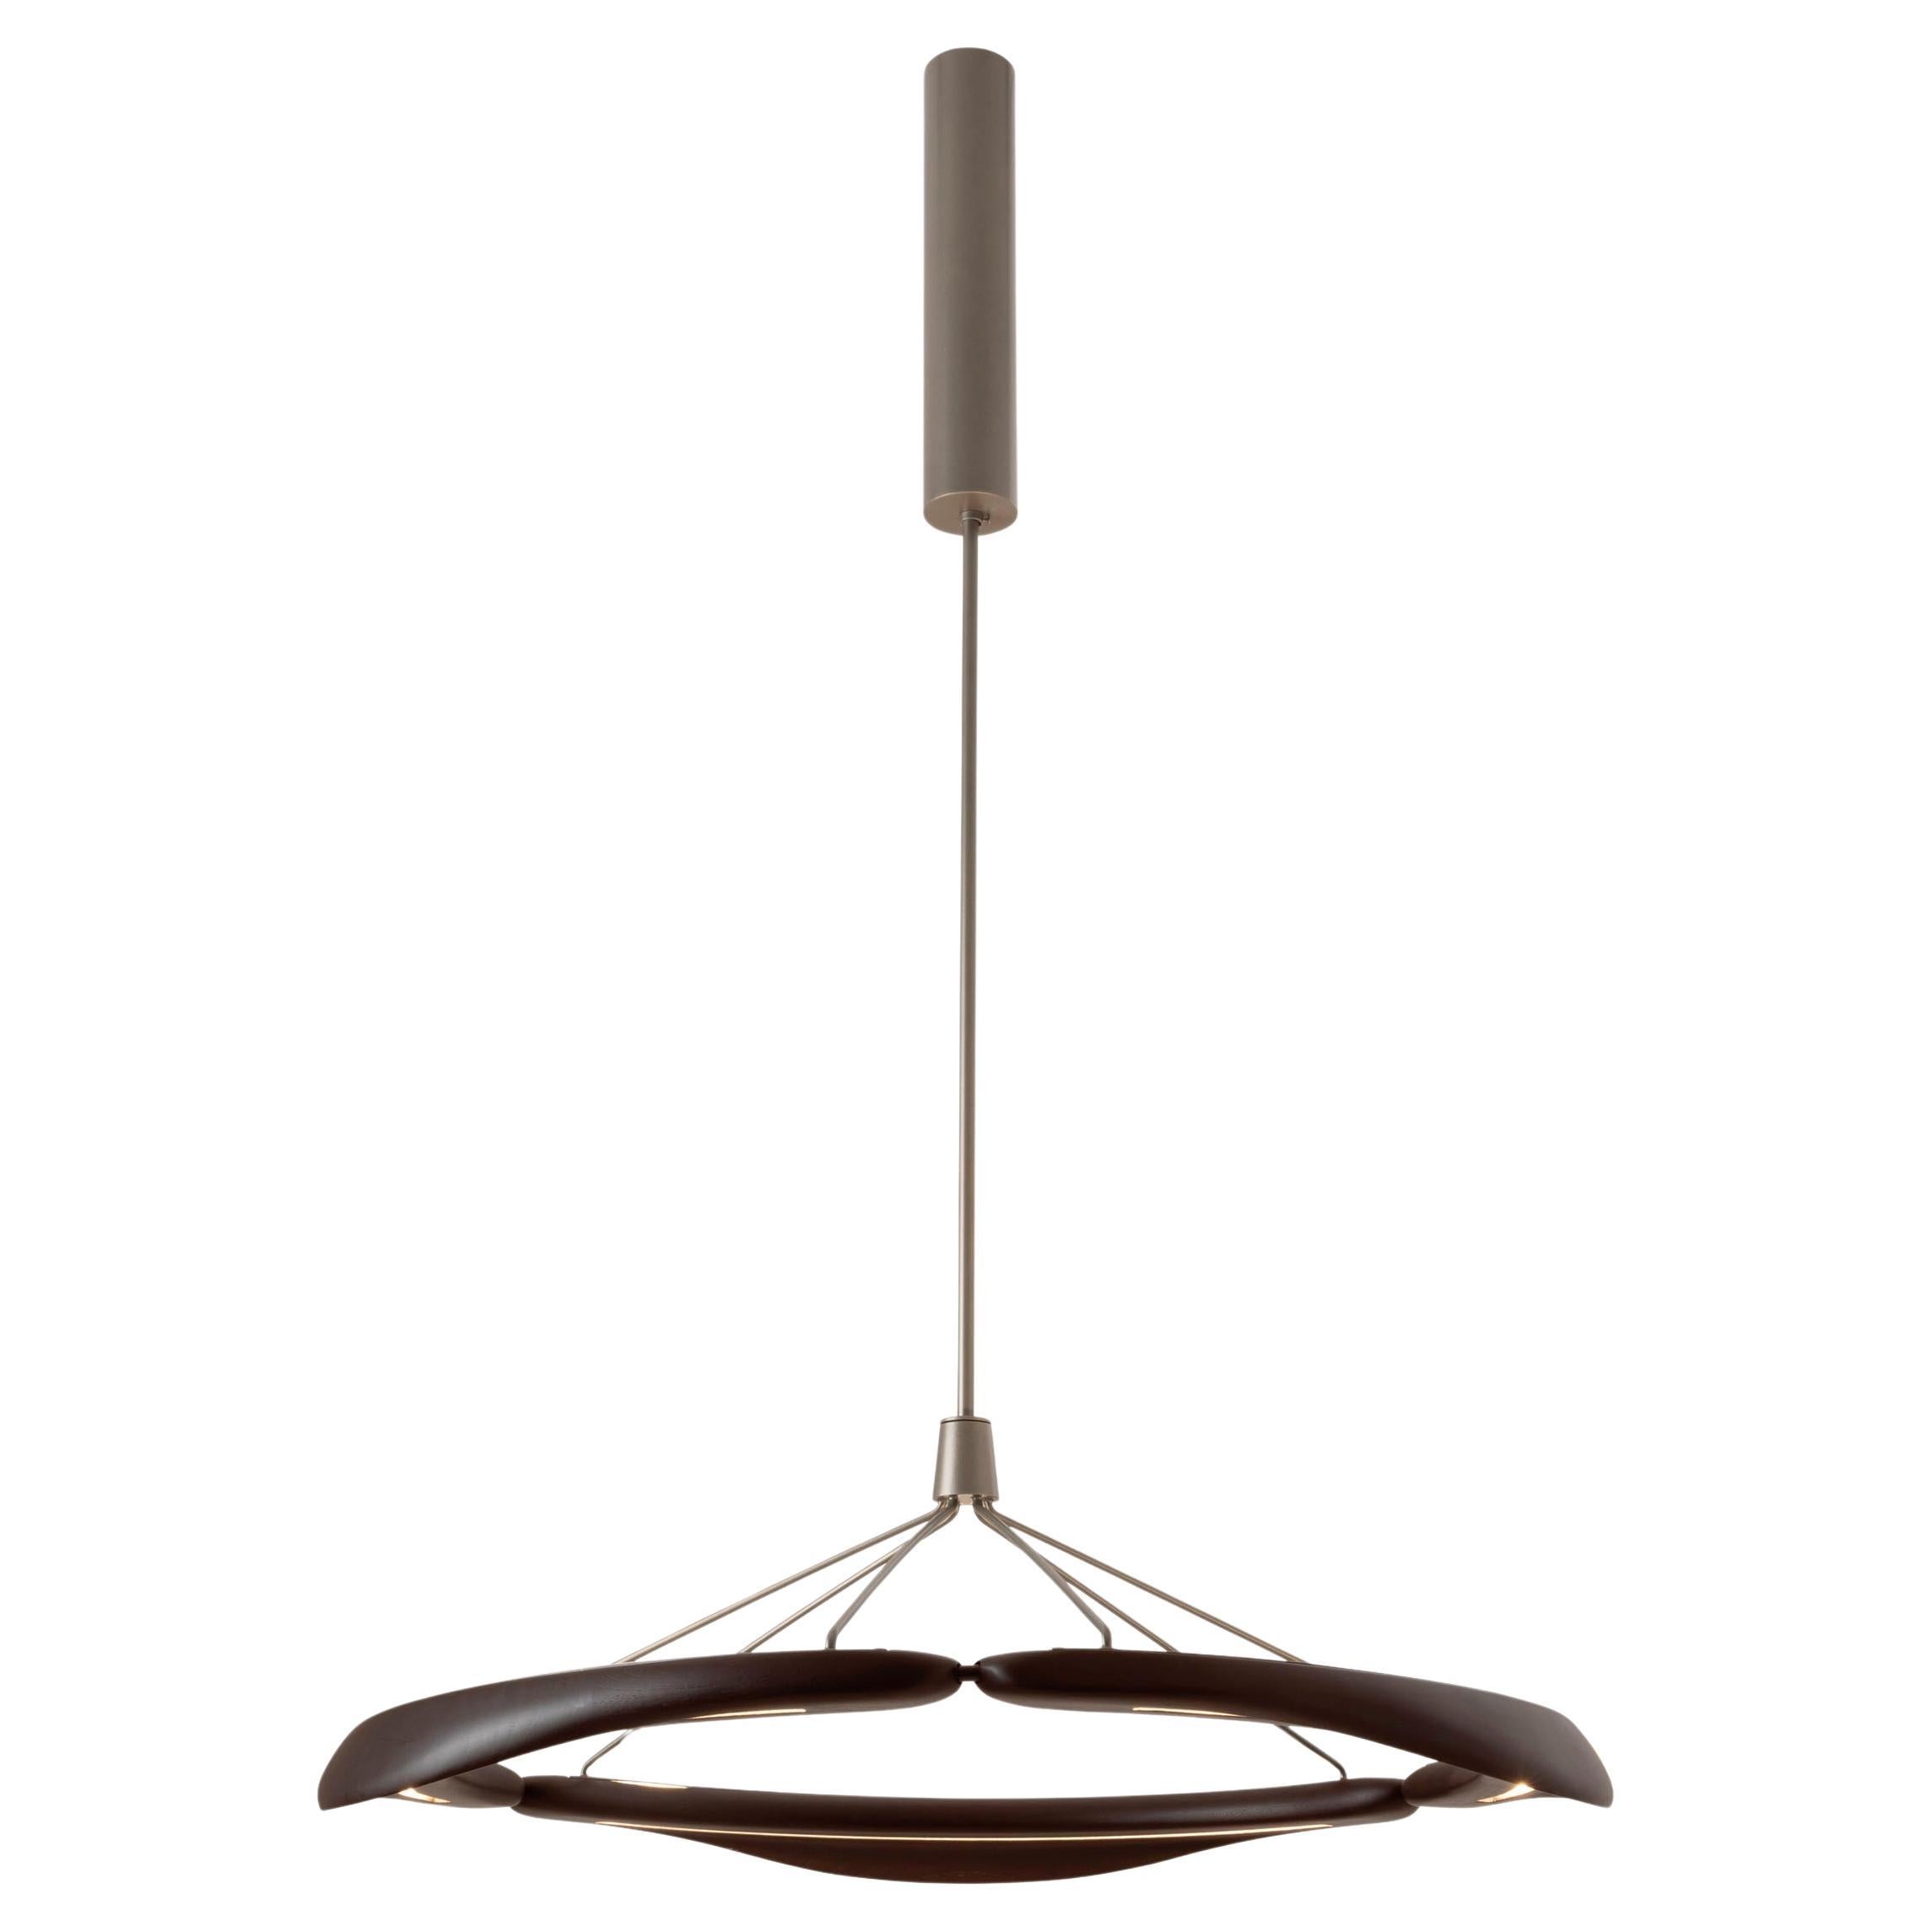 Dunes pendant lamp in canaletto walnut